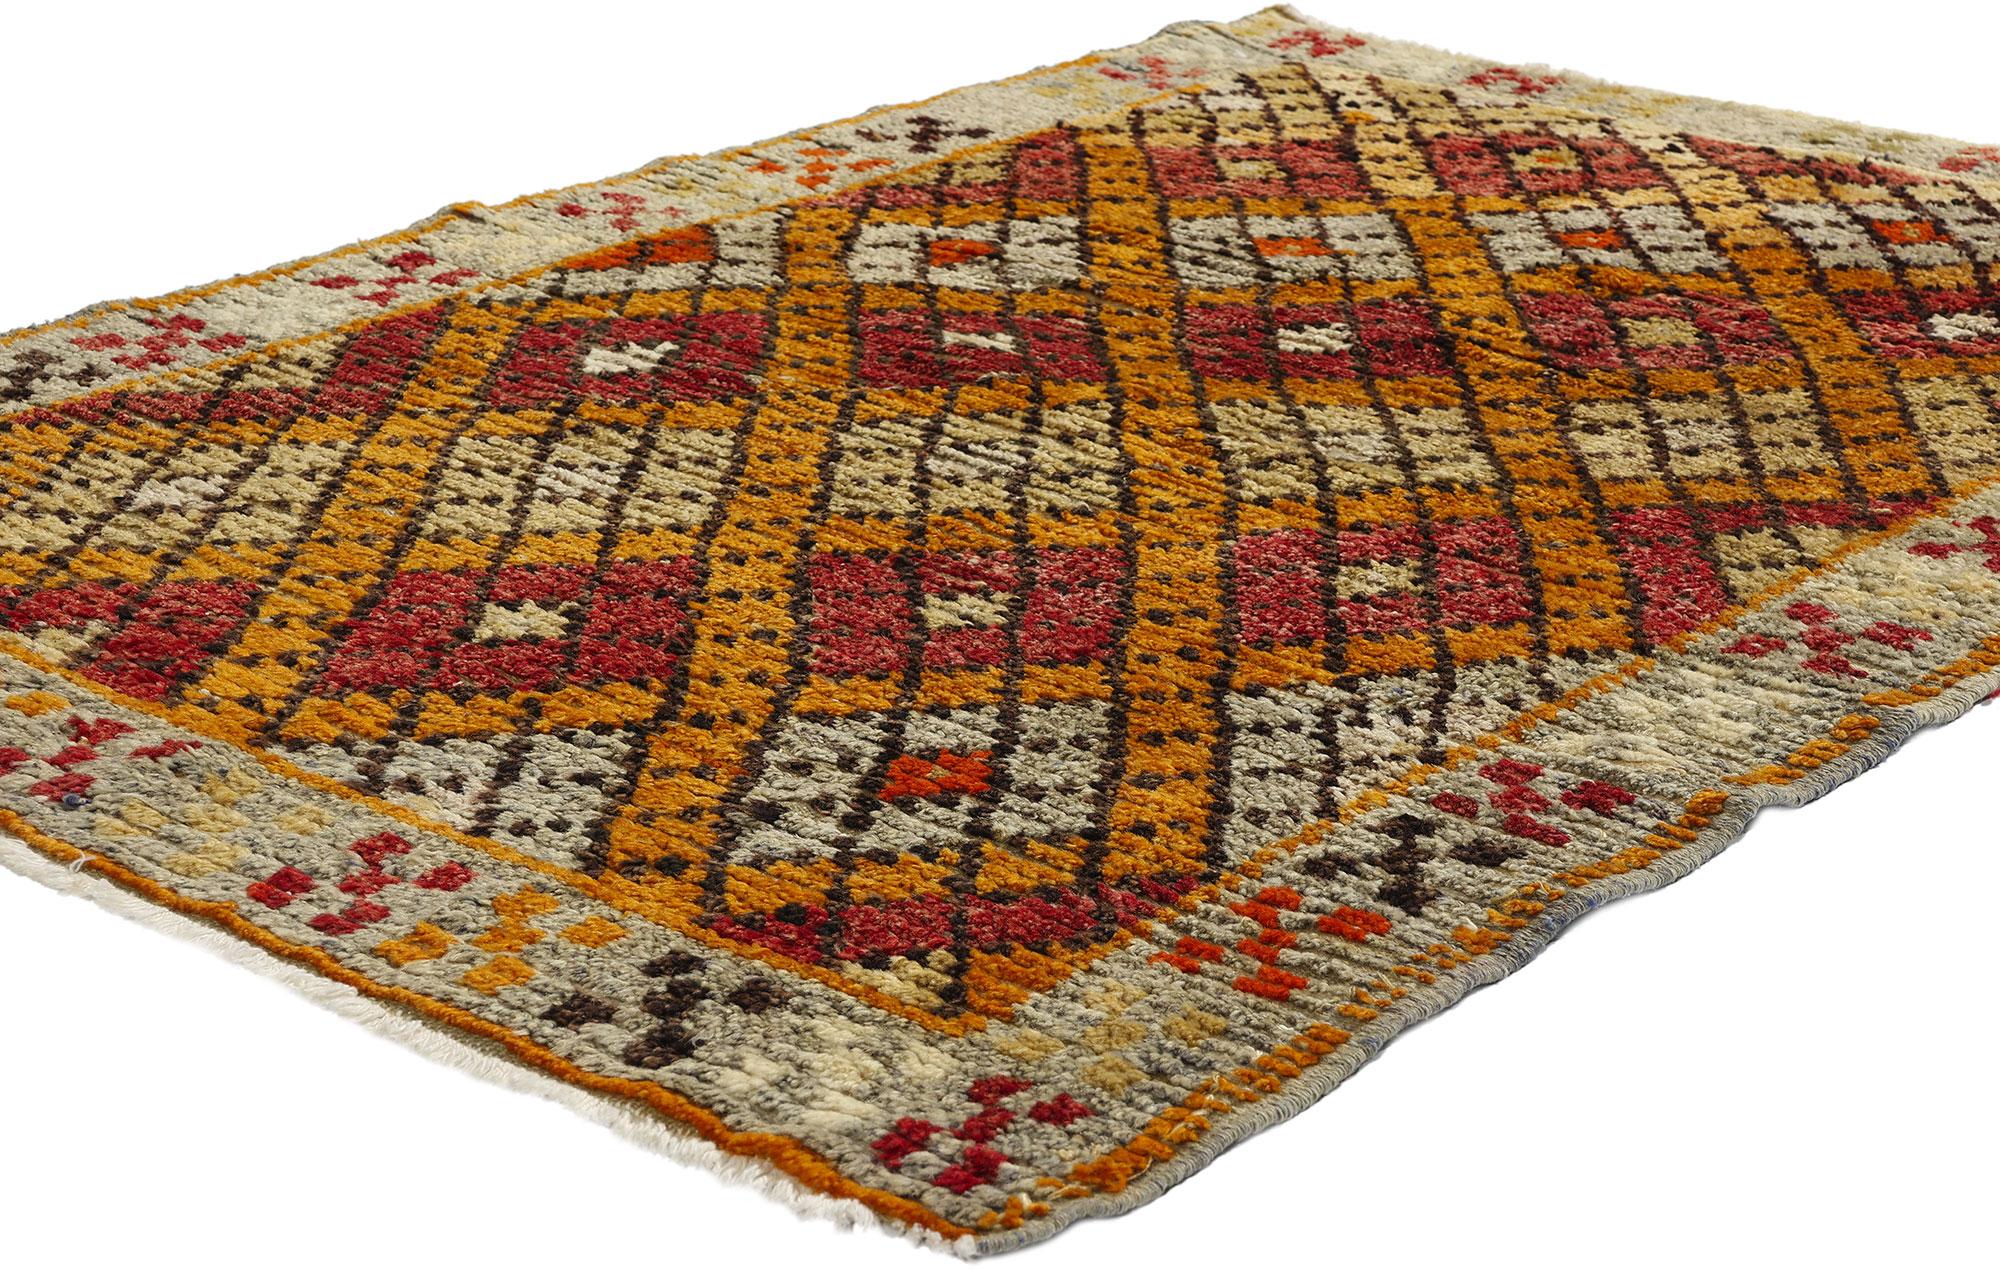 53924 Vintage Turkish Oushak Rug, 03'04 x 04'10. Originating from the Western region of Oushak in Turkey, Turkish Oushak rugs have garnered widespread admiration for their intricate designs, soft color palettes, and premium wool materials.